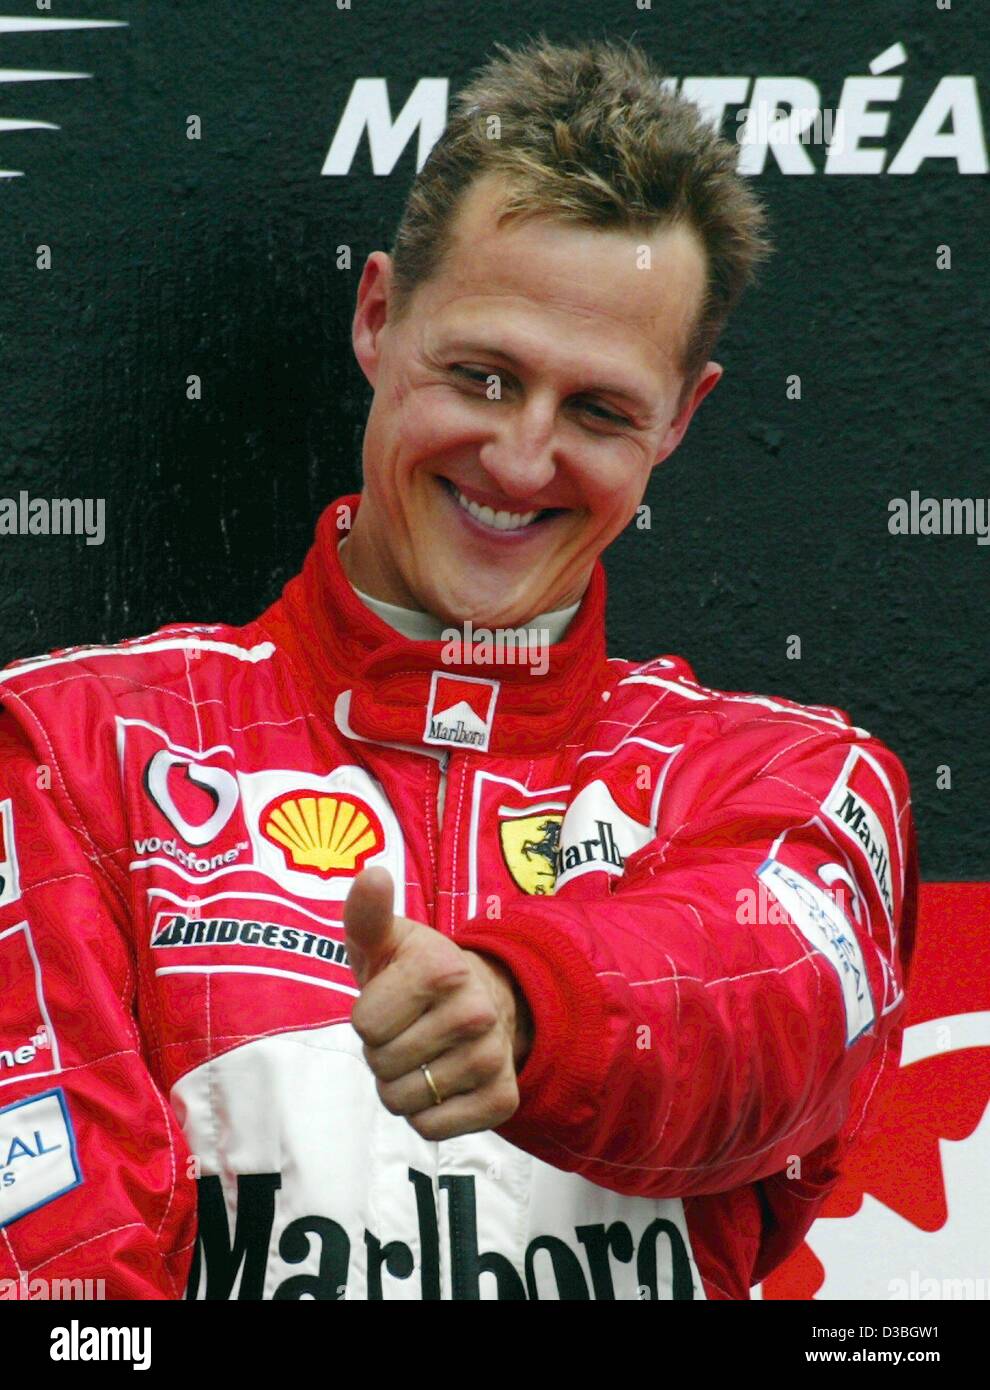 (dpa) - German formula one world champion Michael Schumacher (Ferrari) gestures a 'thumbs up'  during the awards ceremony on the Circuit Gilles Villeneuve formula one racing track after winning the Canadian Grand Prix in Montreal, Canada, 15 June 2003.  Michael Schumacher wins the race and leads in  Stock Photo